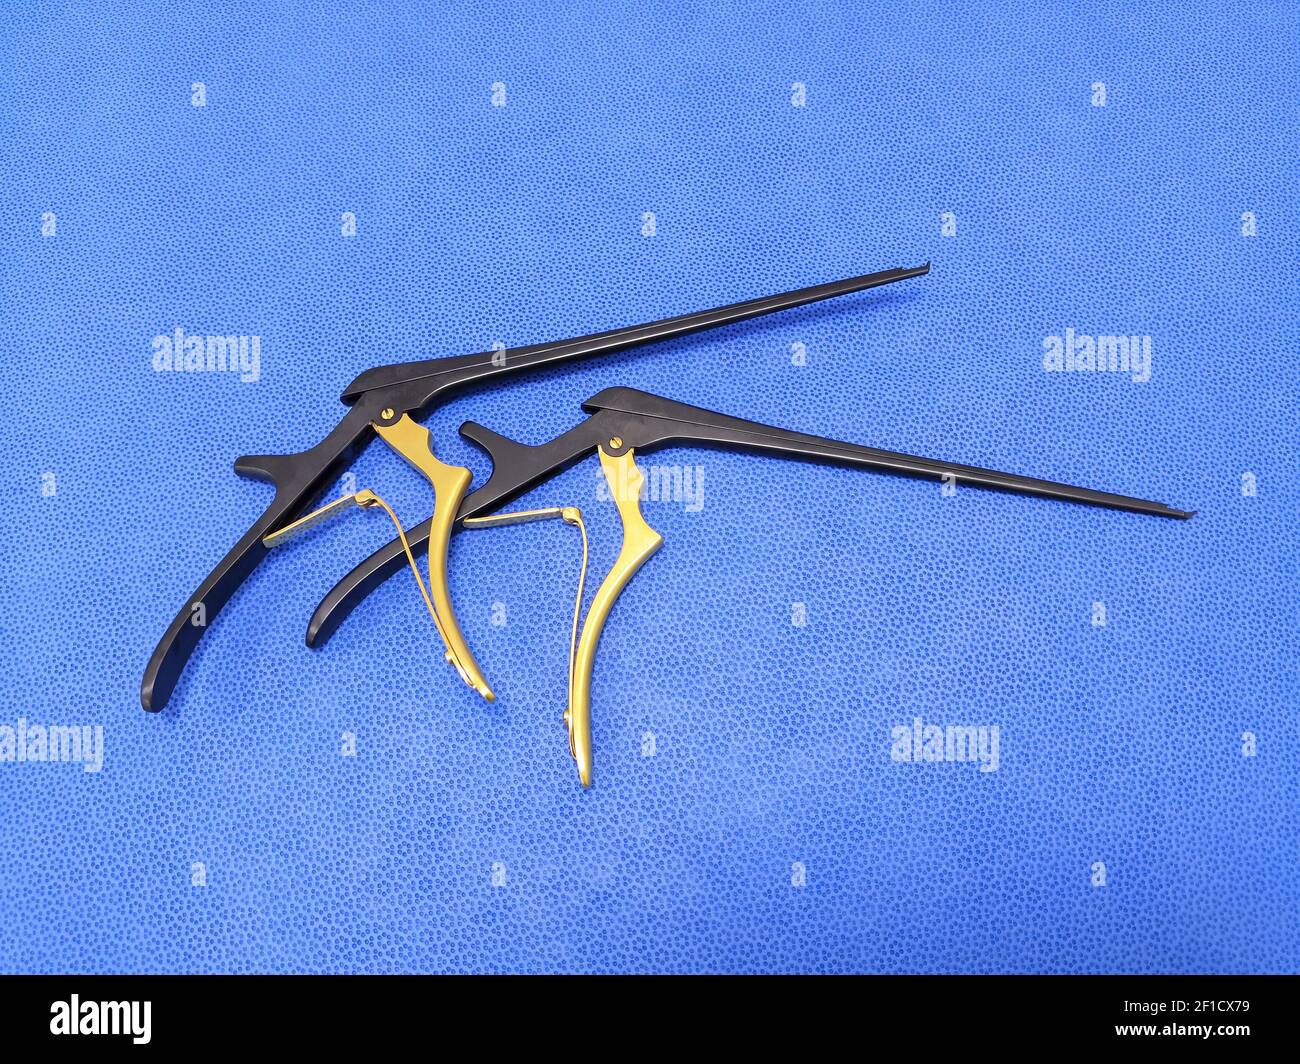 Ferris Smith Kerrison Punch forceps Using For Orthopedic Surgery Stock Photo